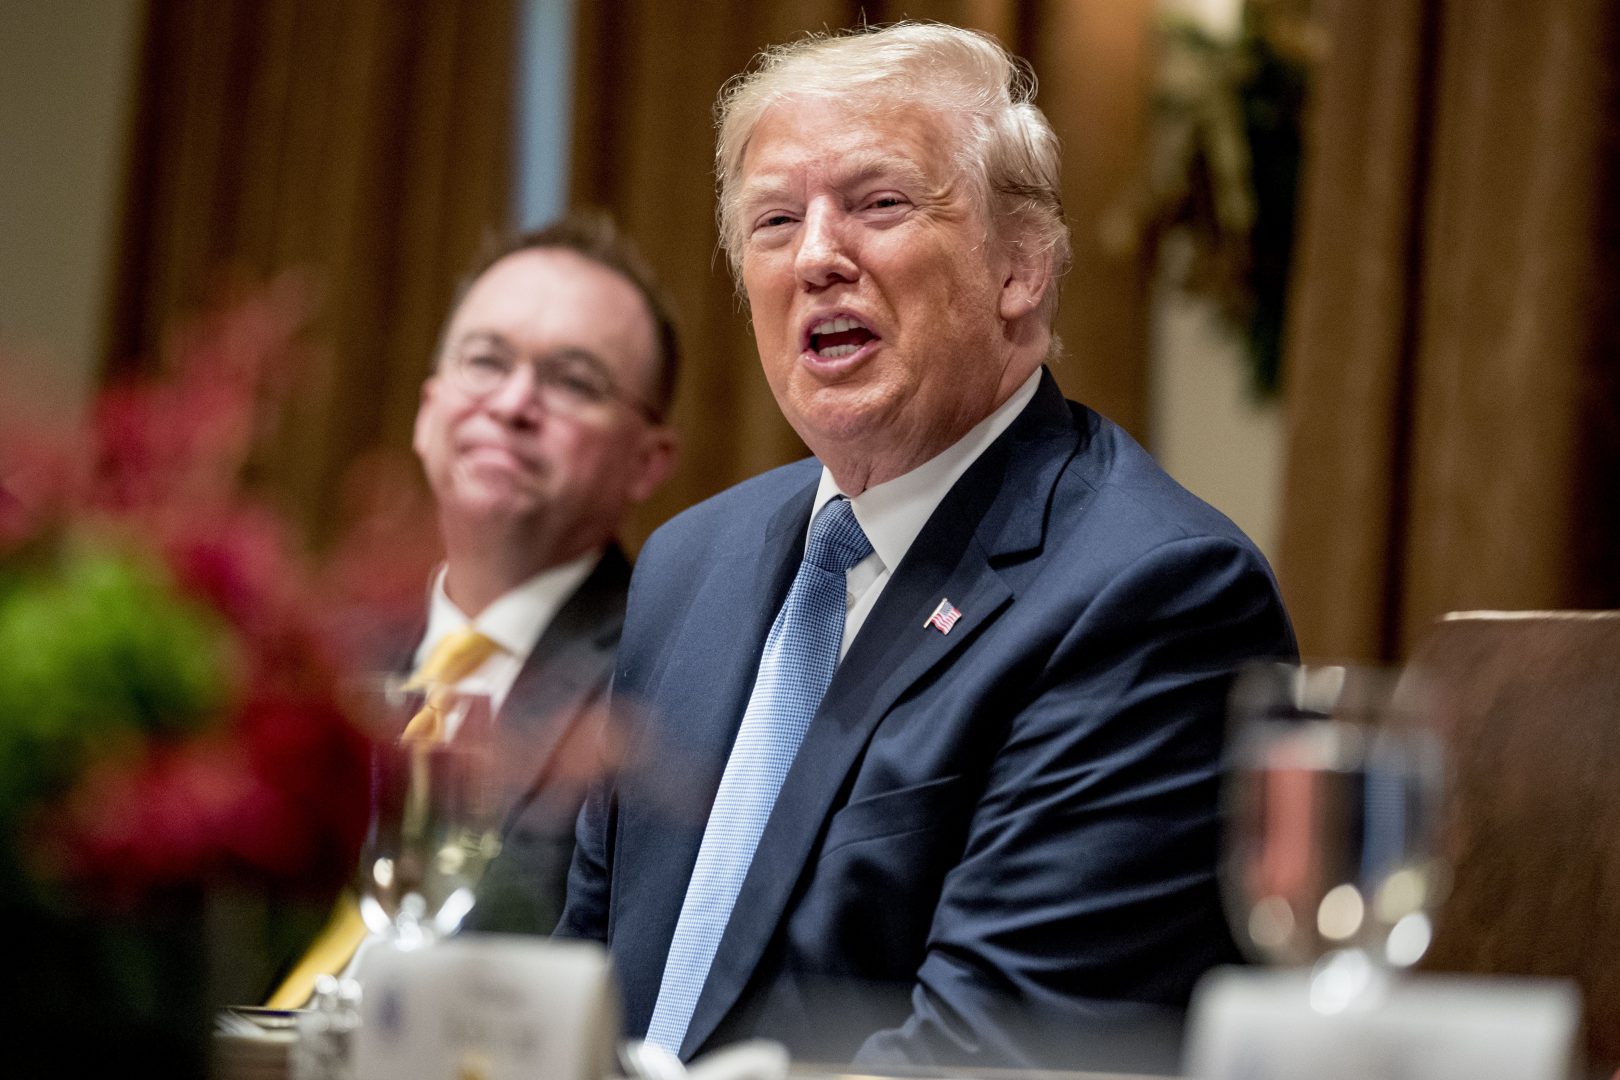 President Donald Trump, foreground, accompanied by acting chief of staff Mick Mulvaney, left, speaks at a luncheon with members of the United Nations Security Council in the Cabinet Room at the White House in Washington, Thursday, Dec. 5, 2019. (AP Photo/Andrew Harnik)